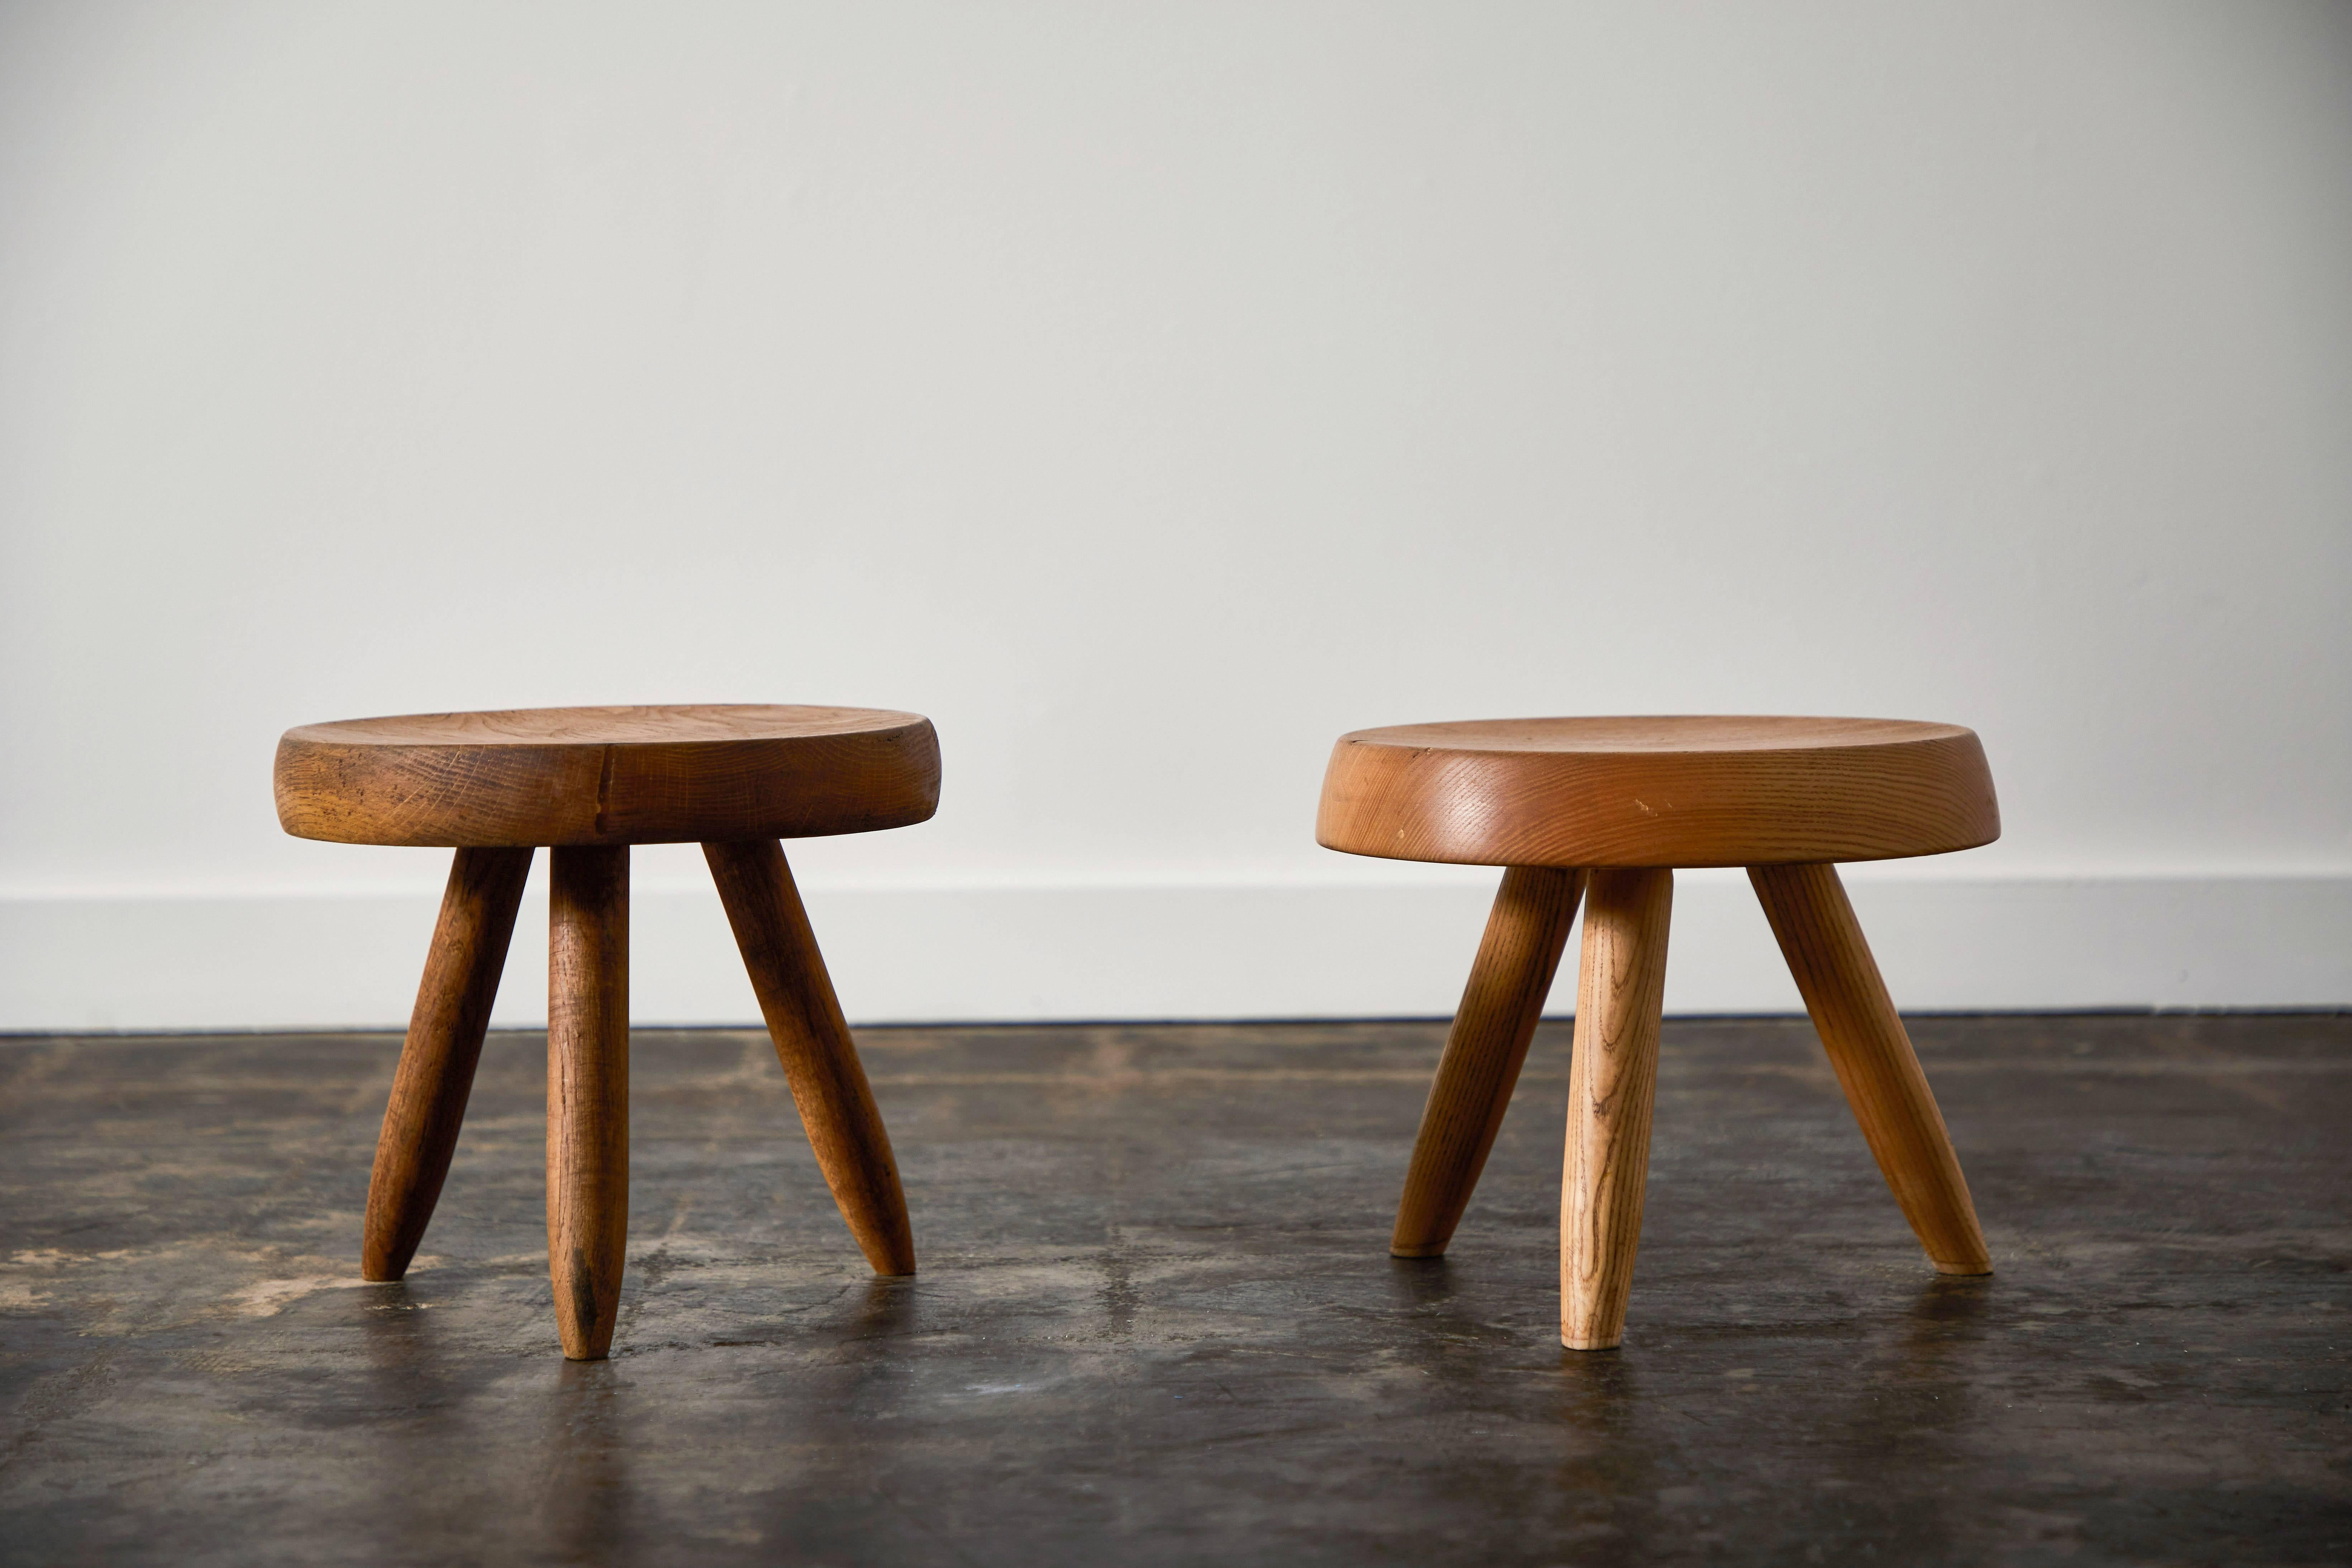 French Stool by Charlotte Perriand for Galerie Steph Simon